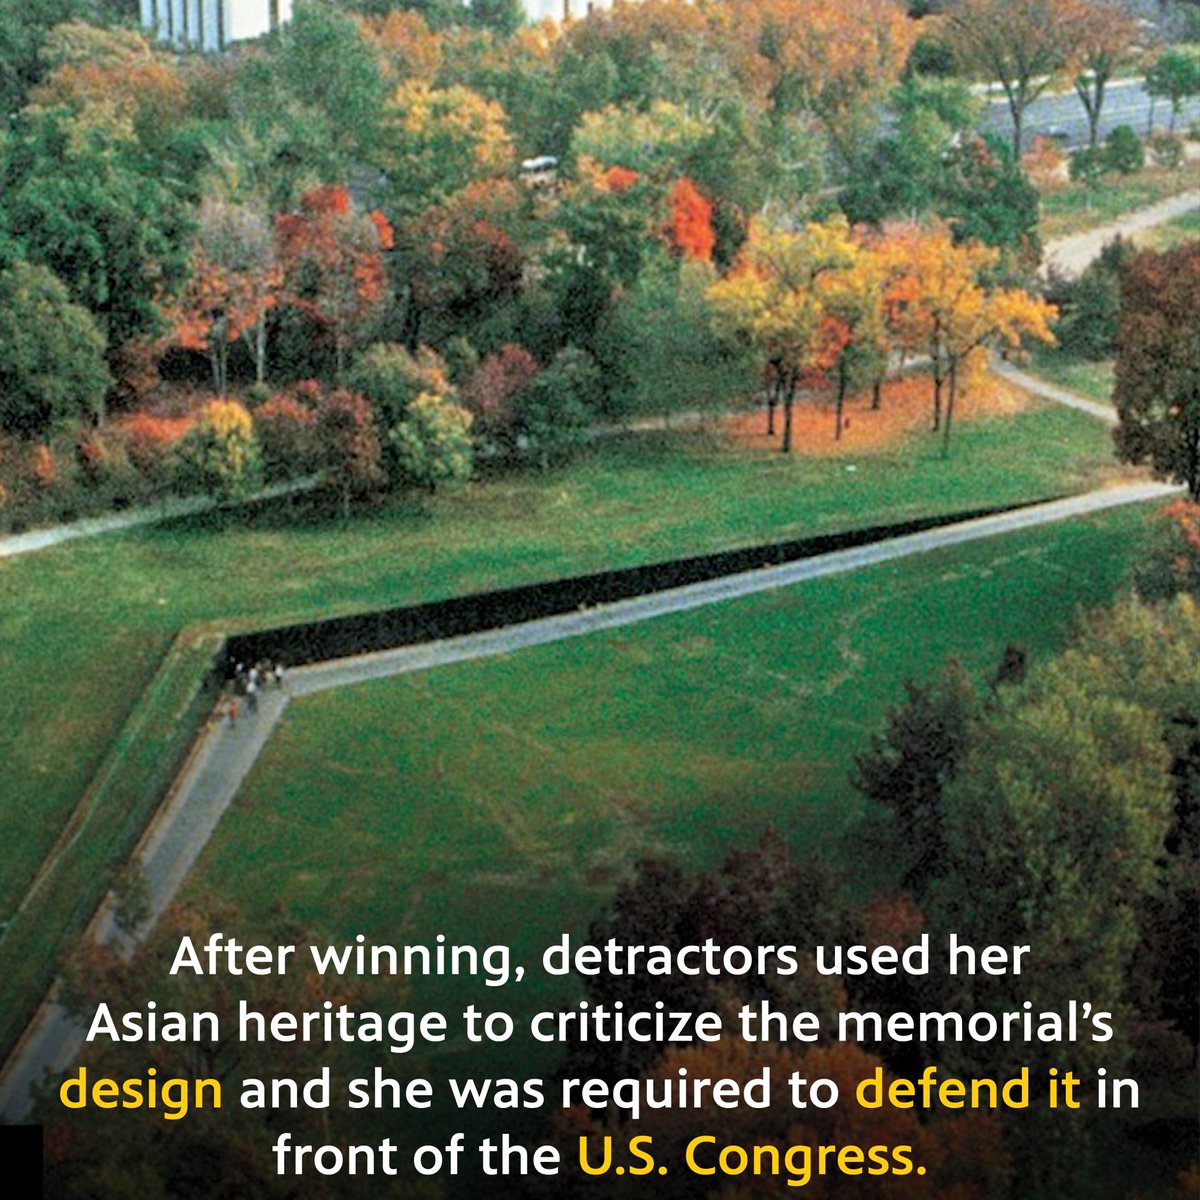 Did you know? Maya Lin’s abstract design for the Vietnam Veterans Memorial was a departure from traditional memorial design. She described the design as “...a rift in the earth, a long, polished, black stone wall, emerging from and receding from the earth.”